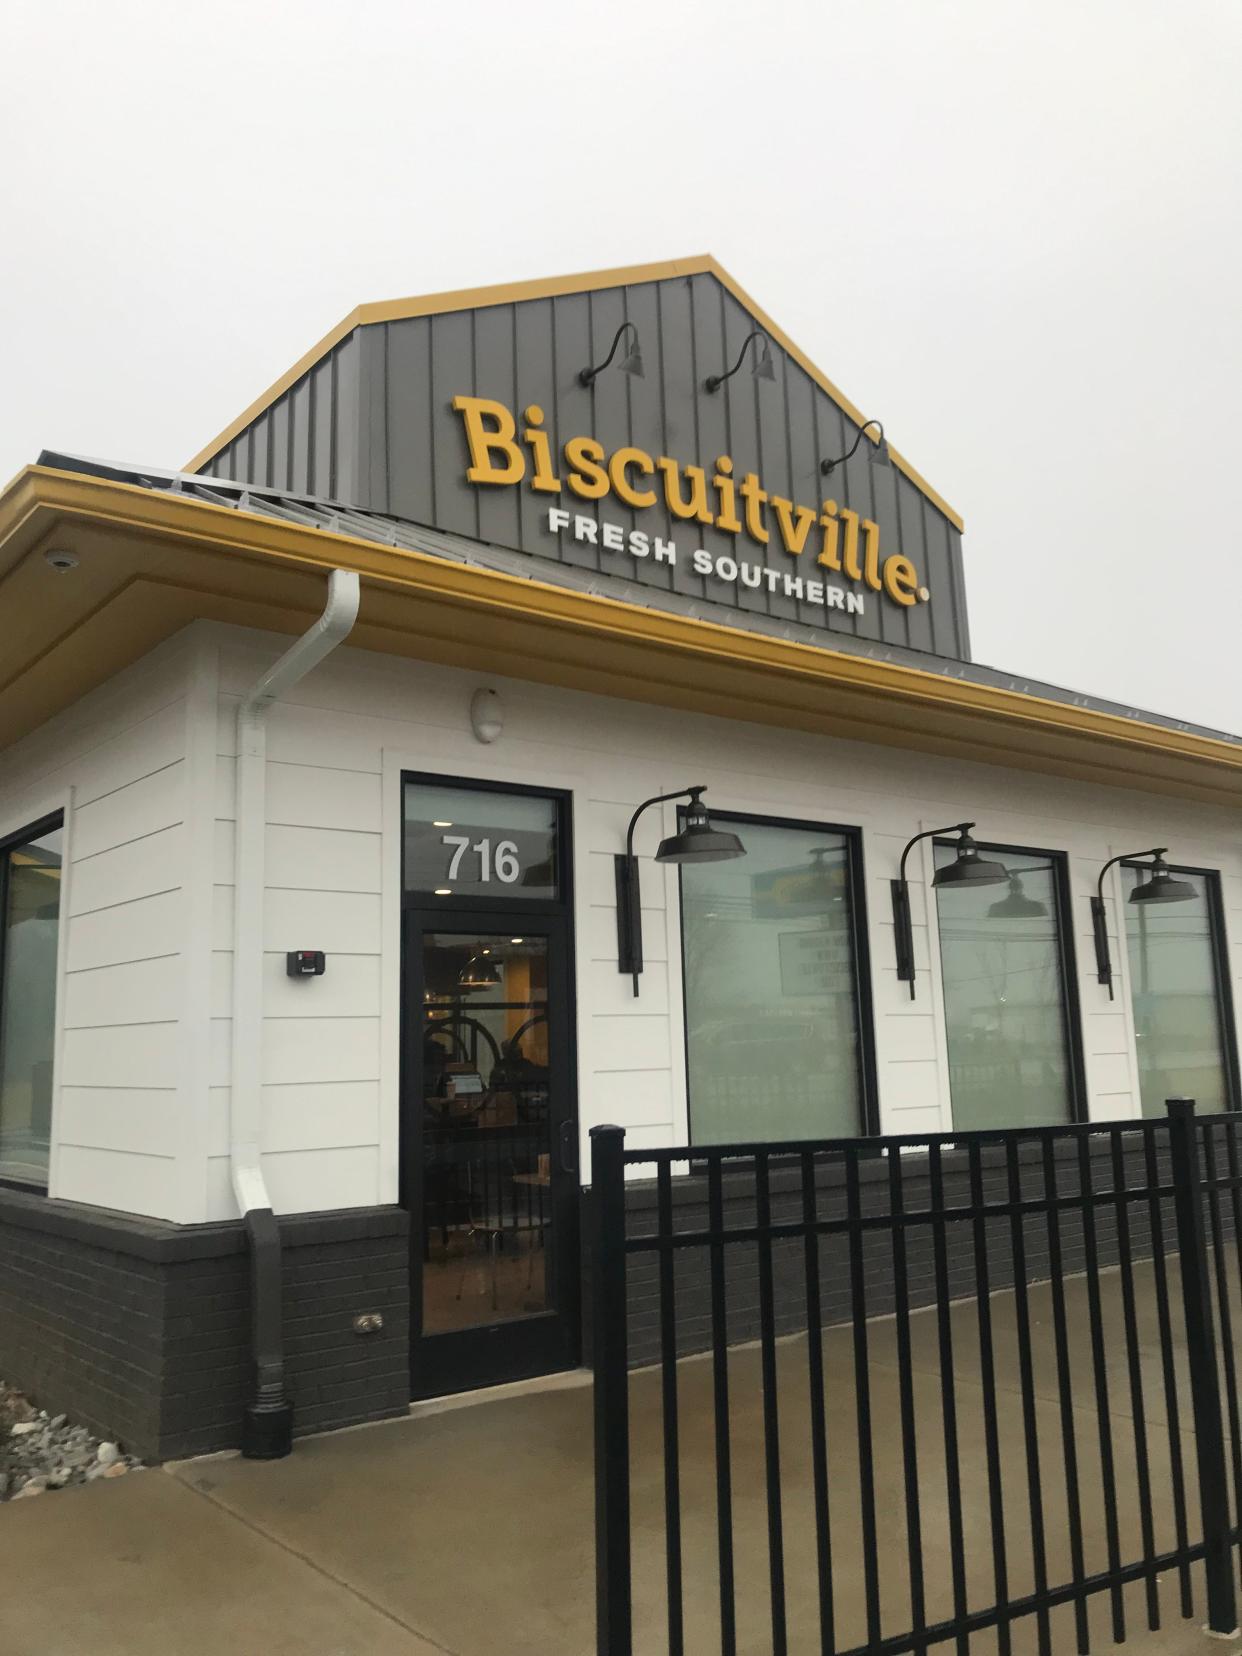 Biscuitville scored a near perfect score after its recent inspection.